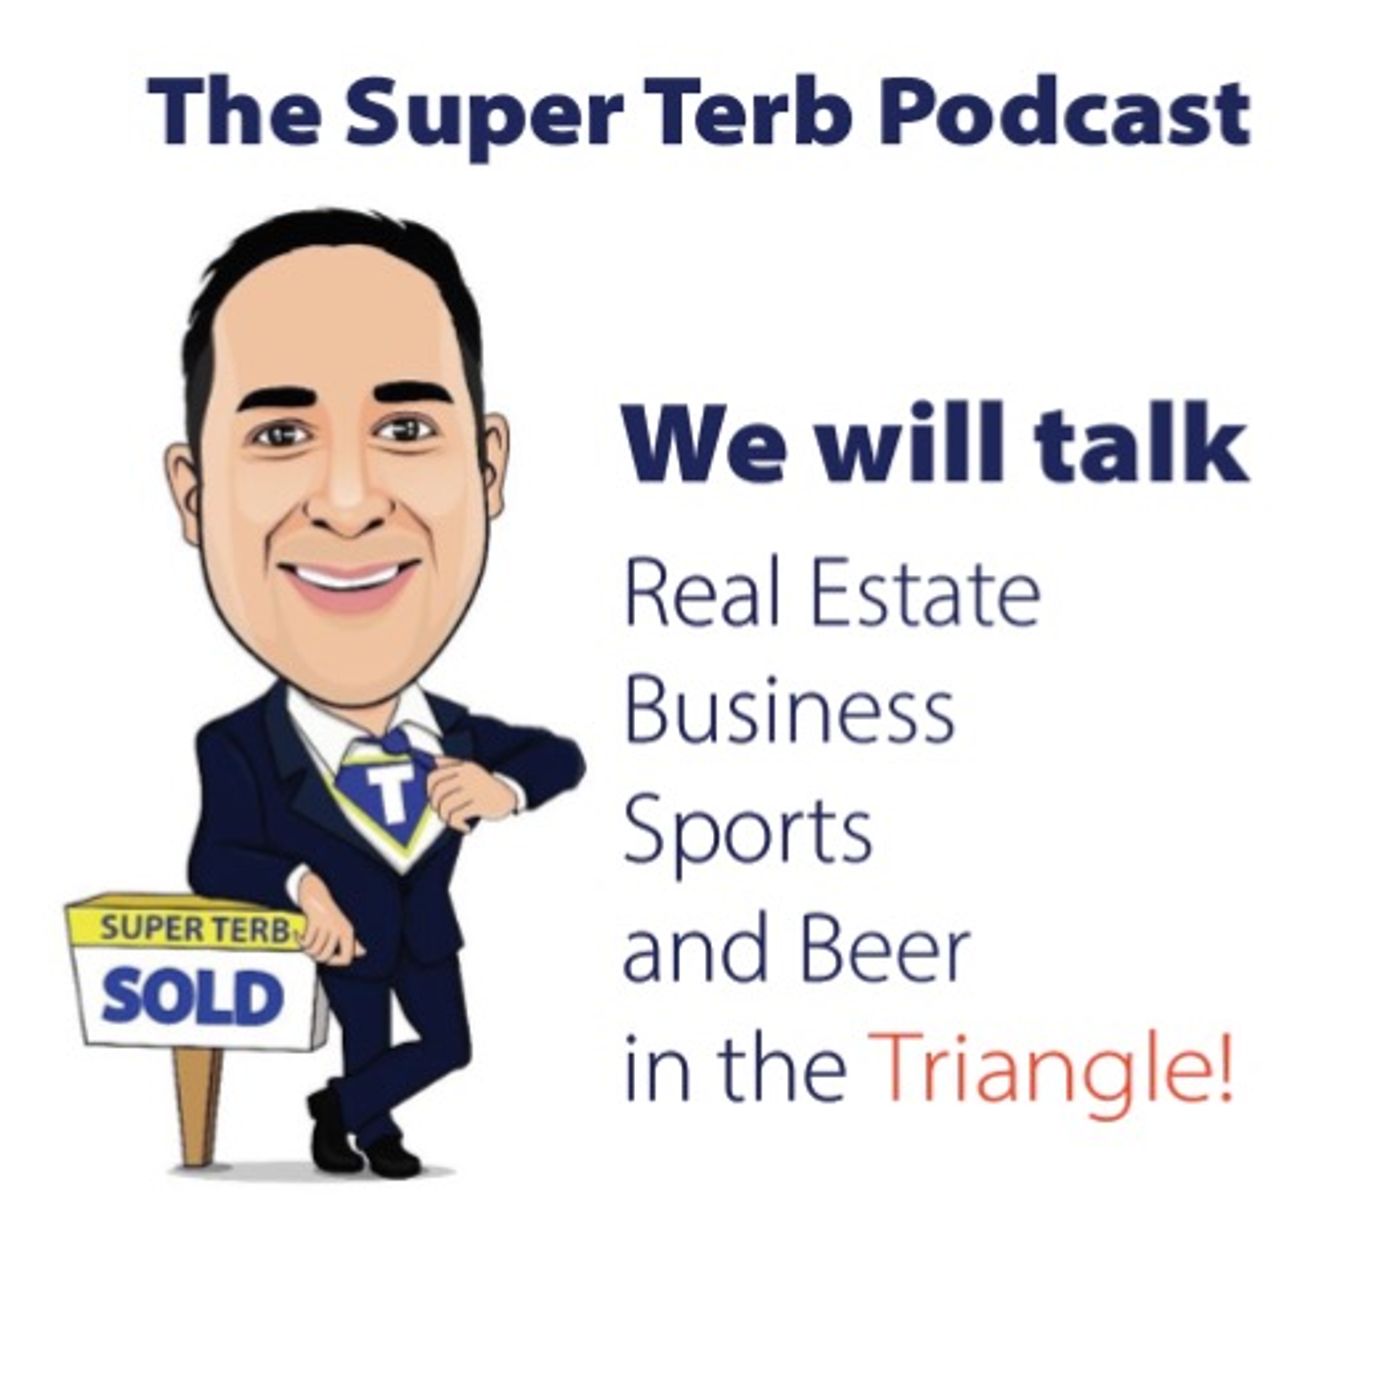 🎙The ”Super Terb Podcast”, Episode 47 is live!